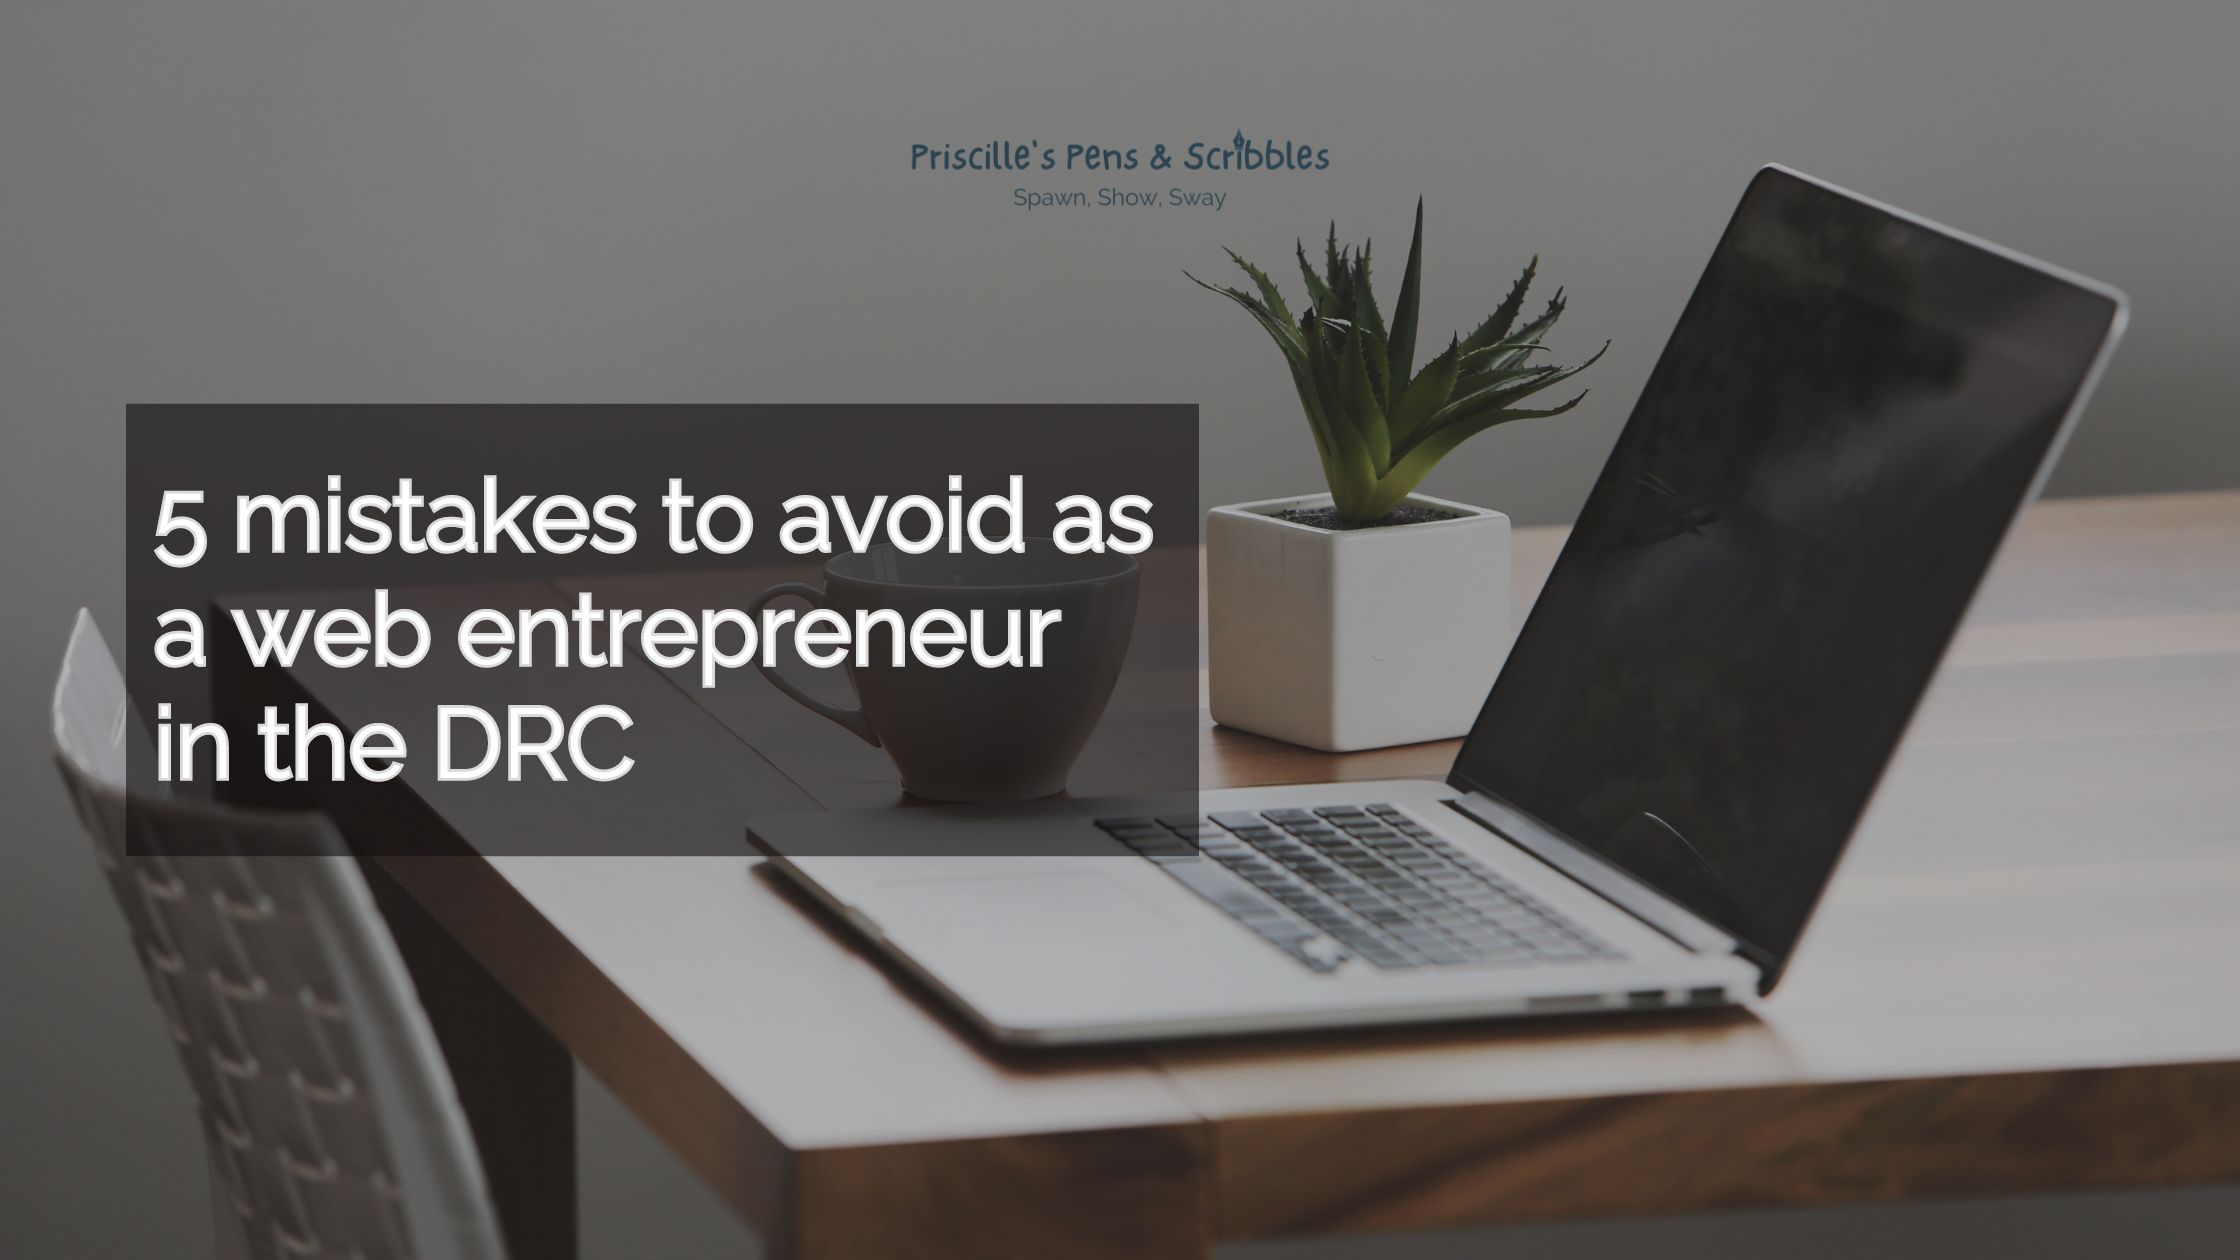 5 mistakes to avoid when starting as a web entrepreneur in the DRC